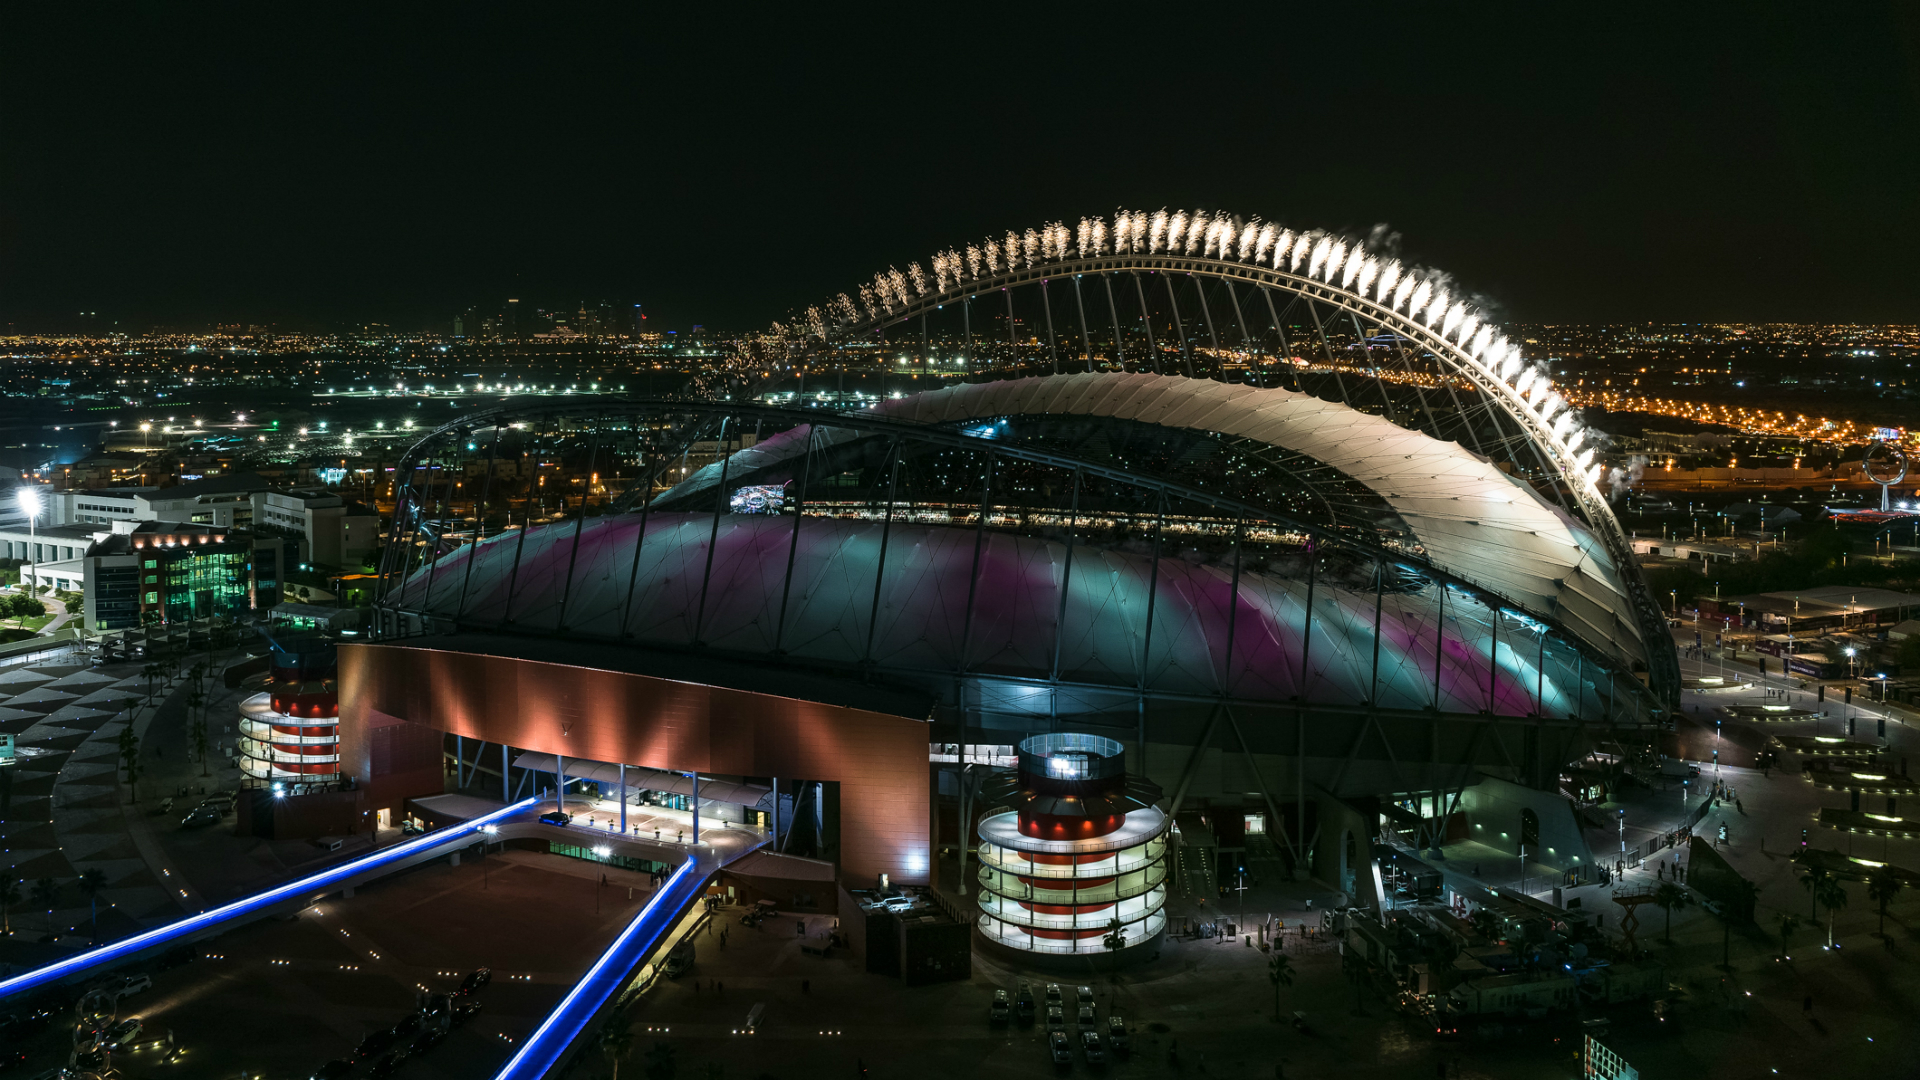 FIFA has declared the Education City Stadium will not be ready to host the Club World Cup final, leading to a change of venue.